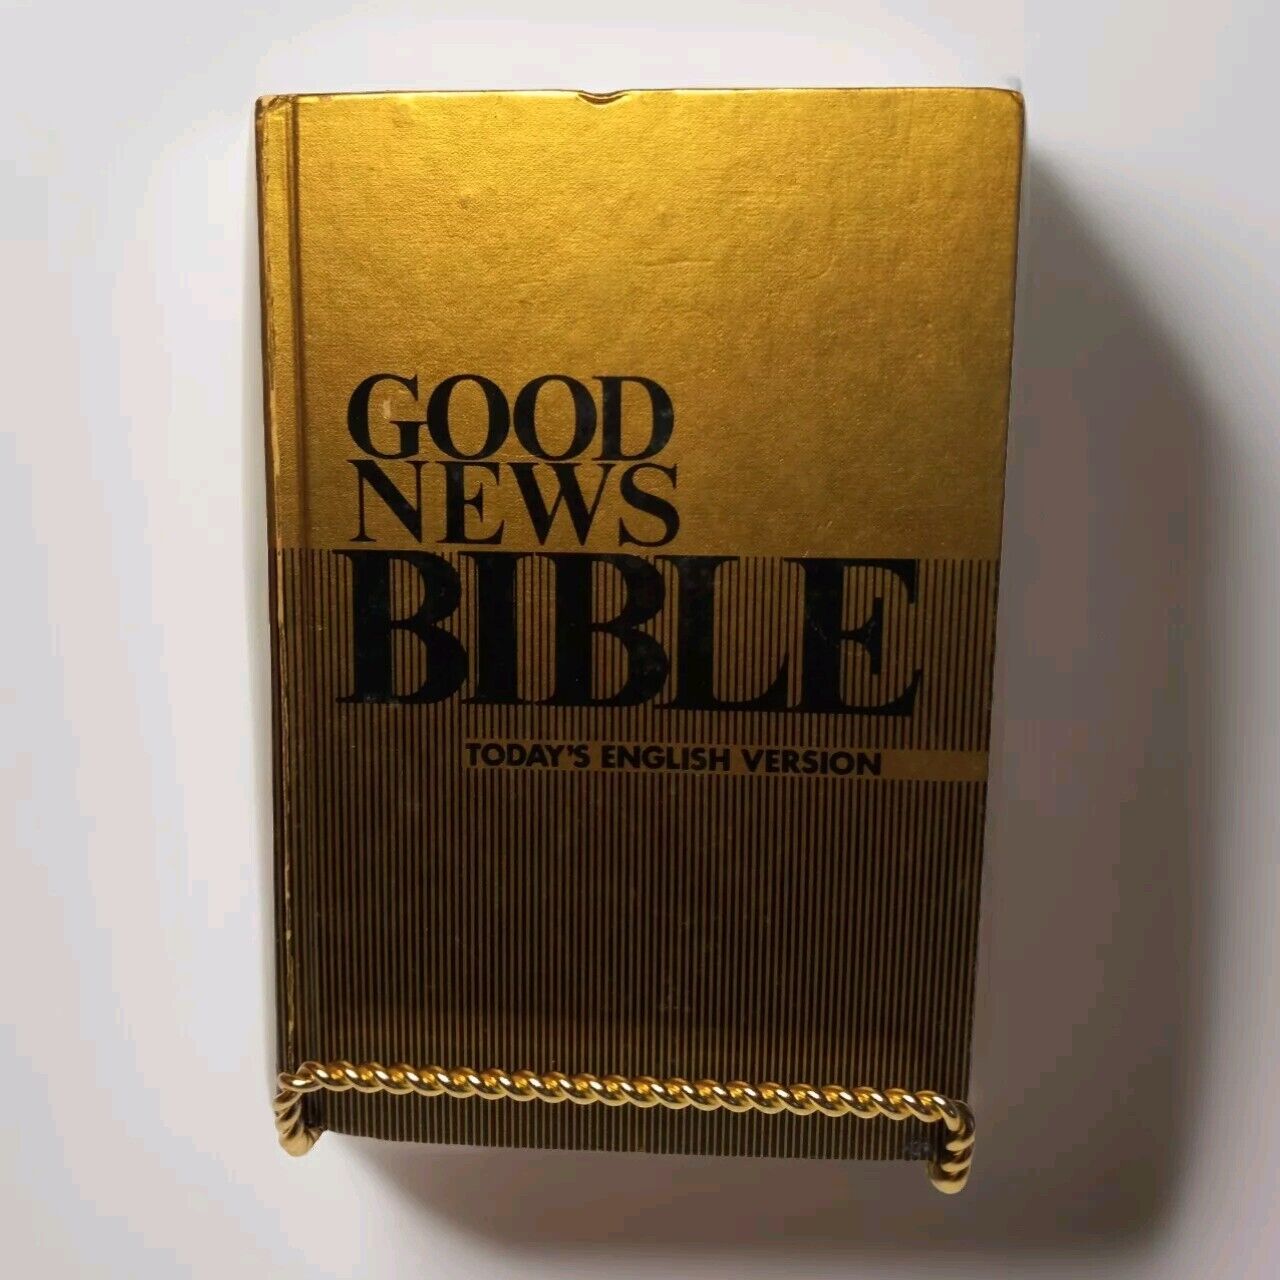 Vintage Good News Bible In Today’s English Version/Hardcover/Gold/Black...